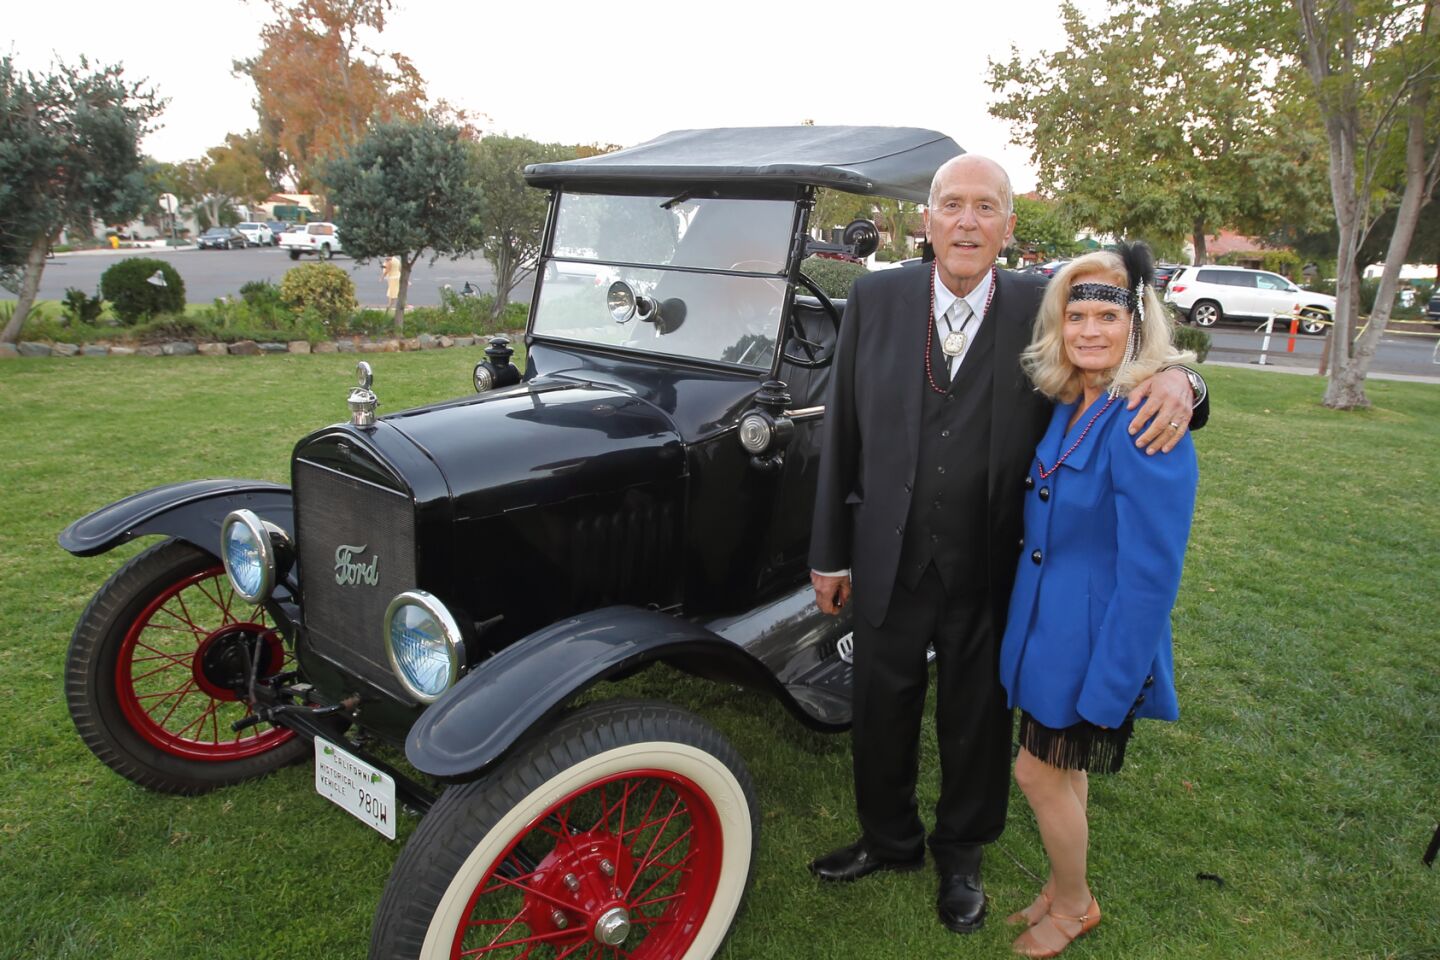 David Wilson and Jana Green pose by a 1925 Ford Model T